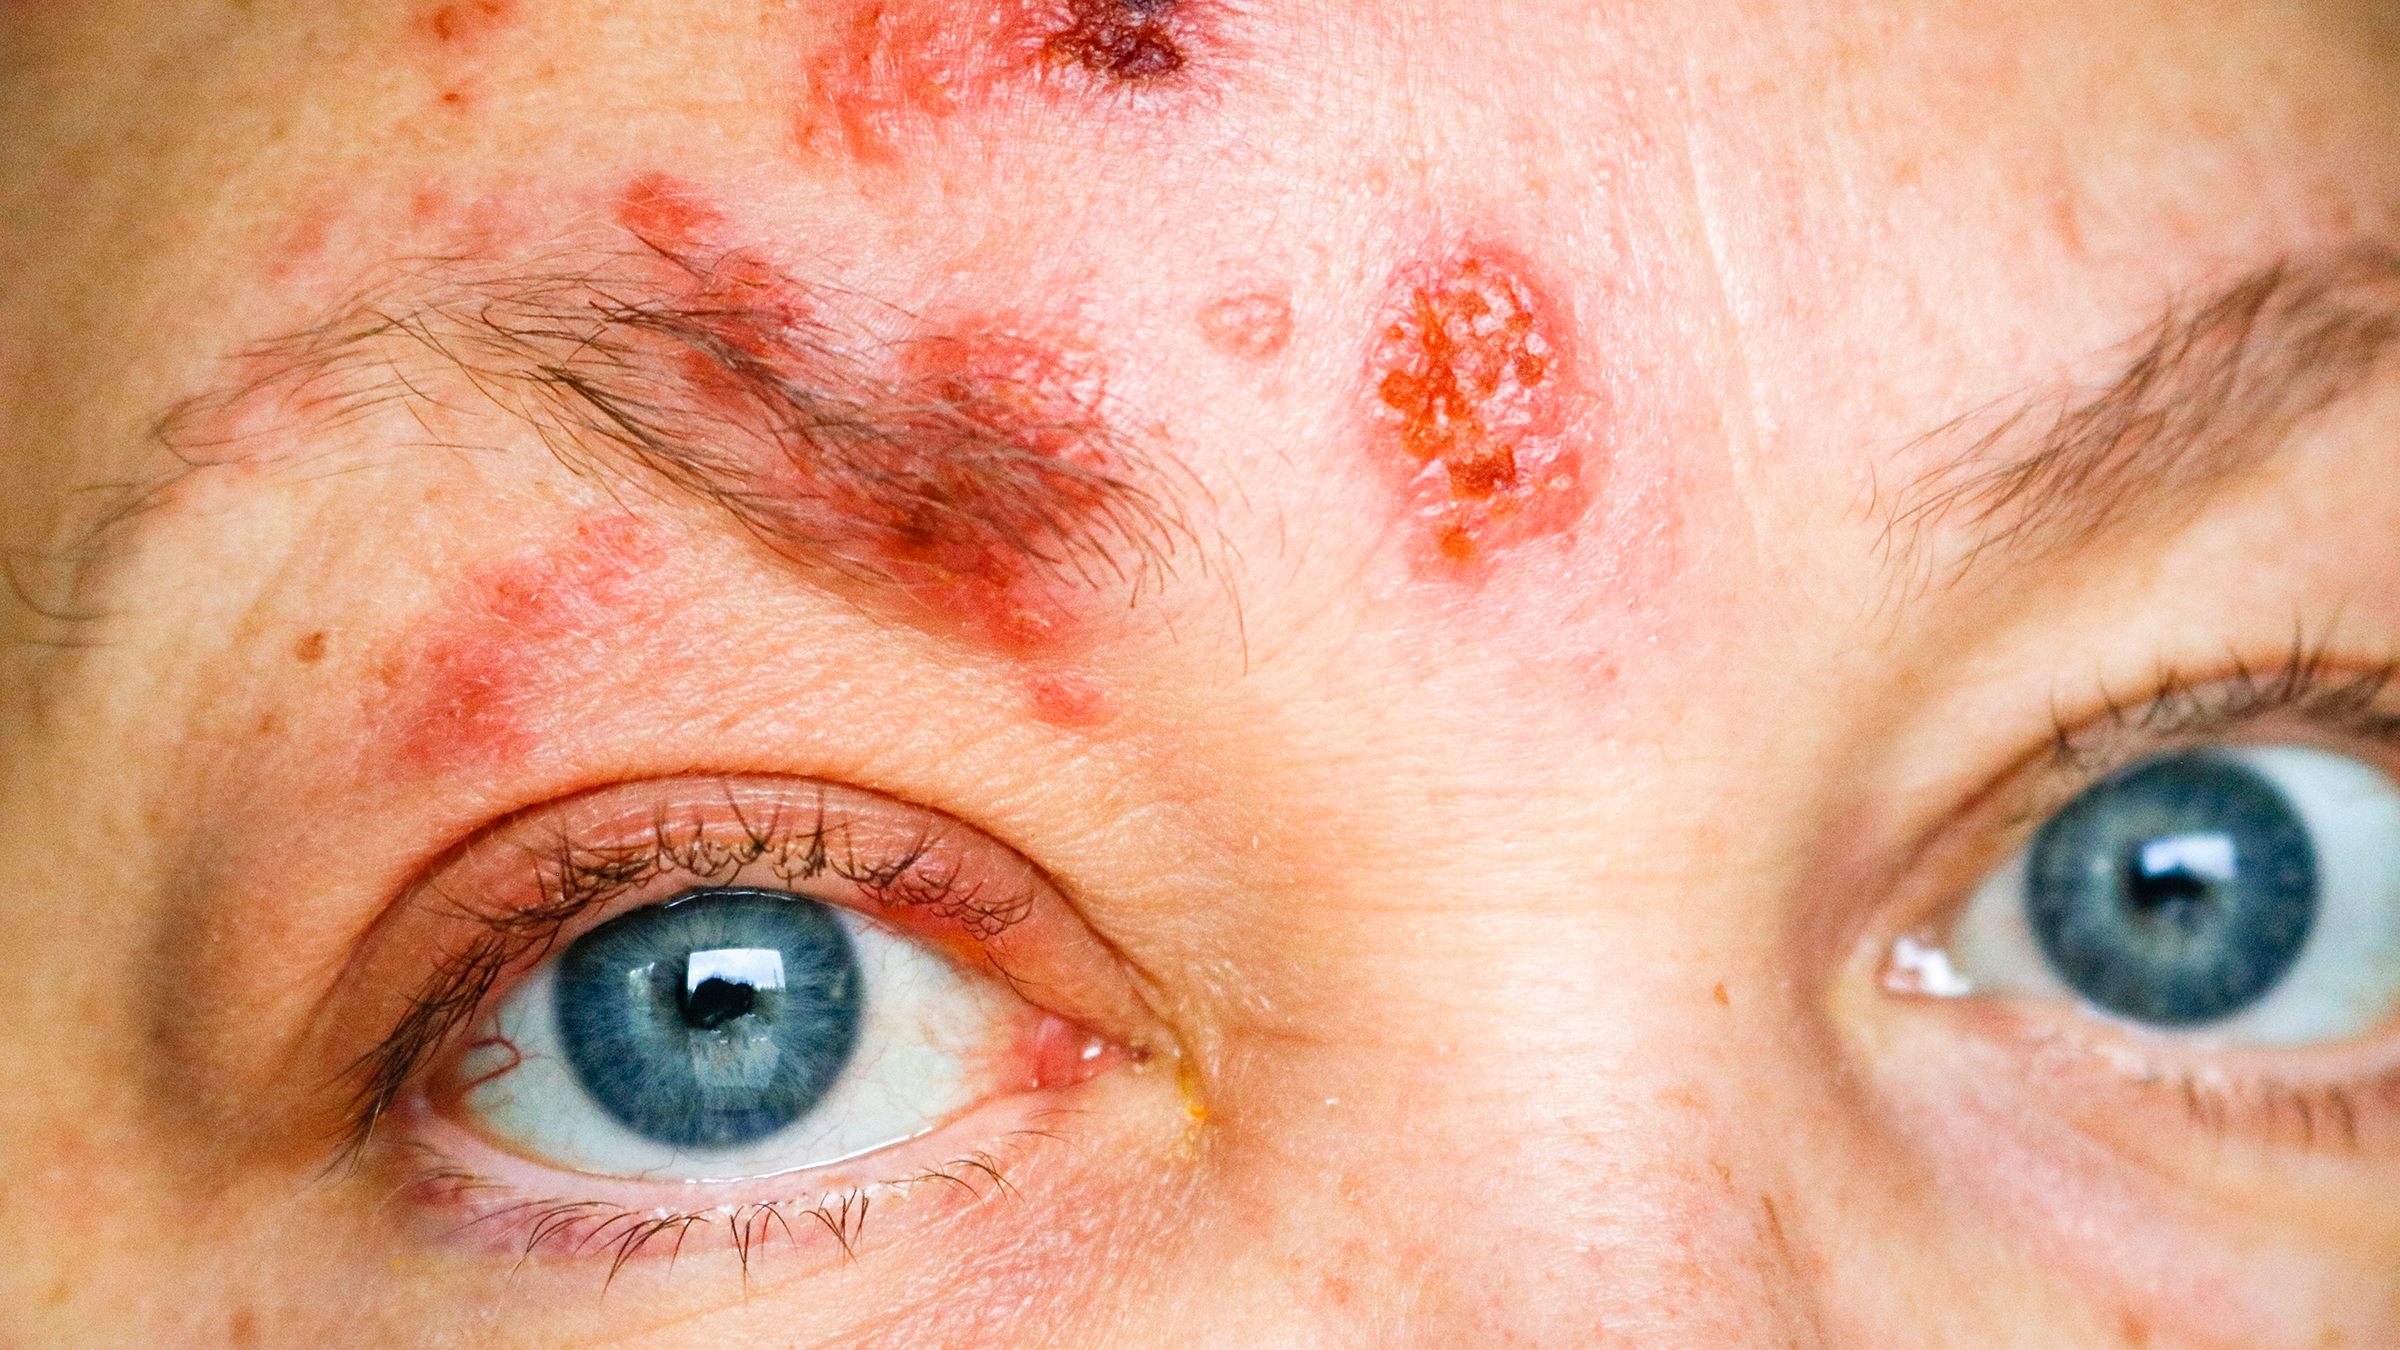 What Causes a Rash the Eye? Do You Treat It? - GoodRx